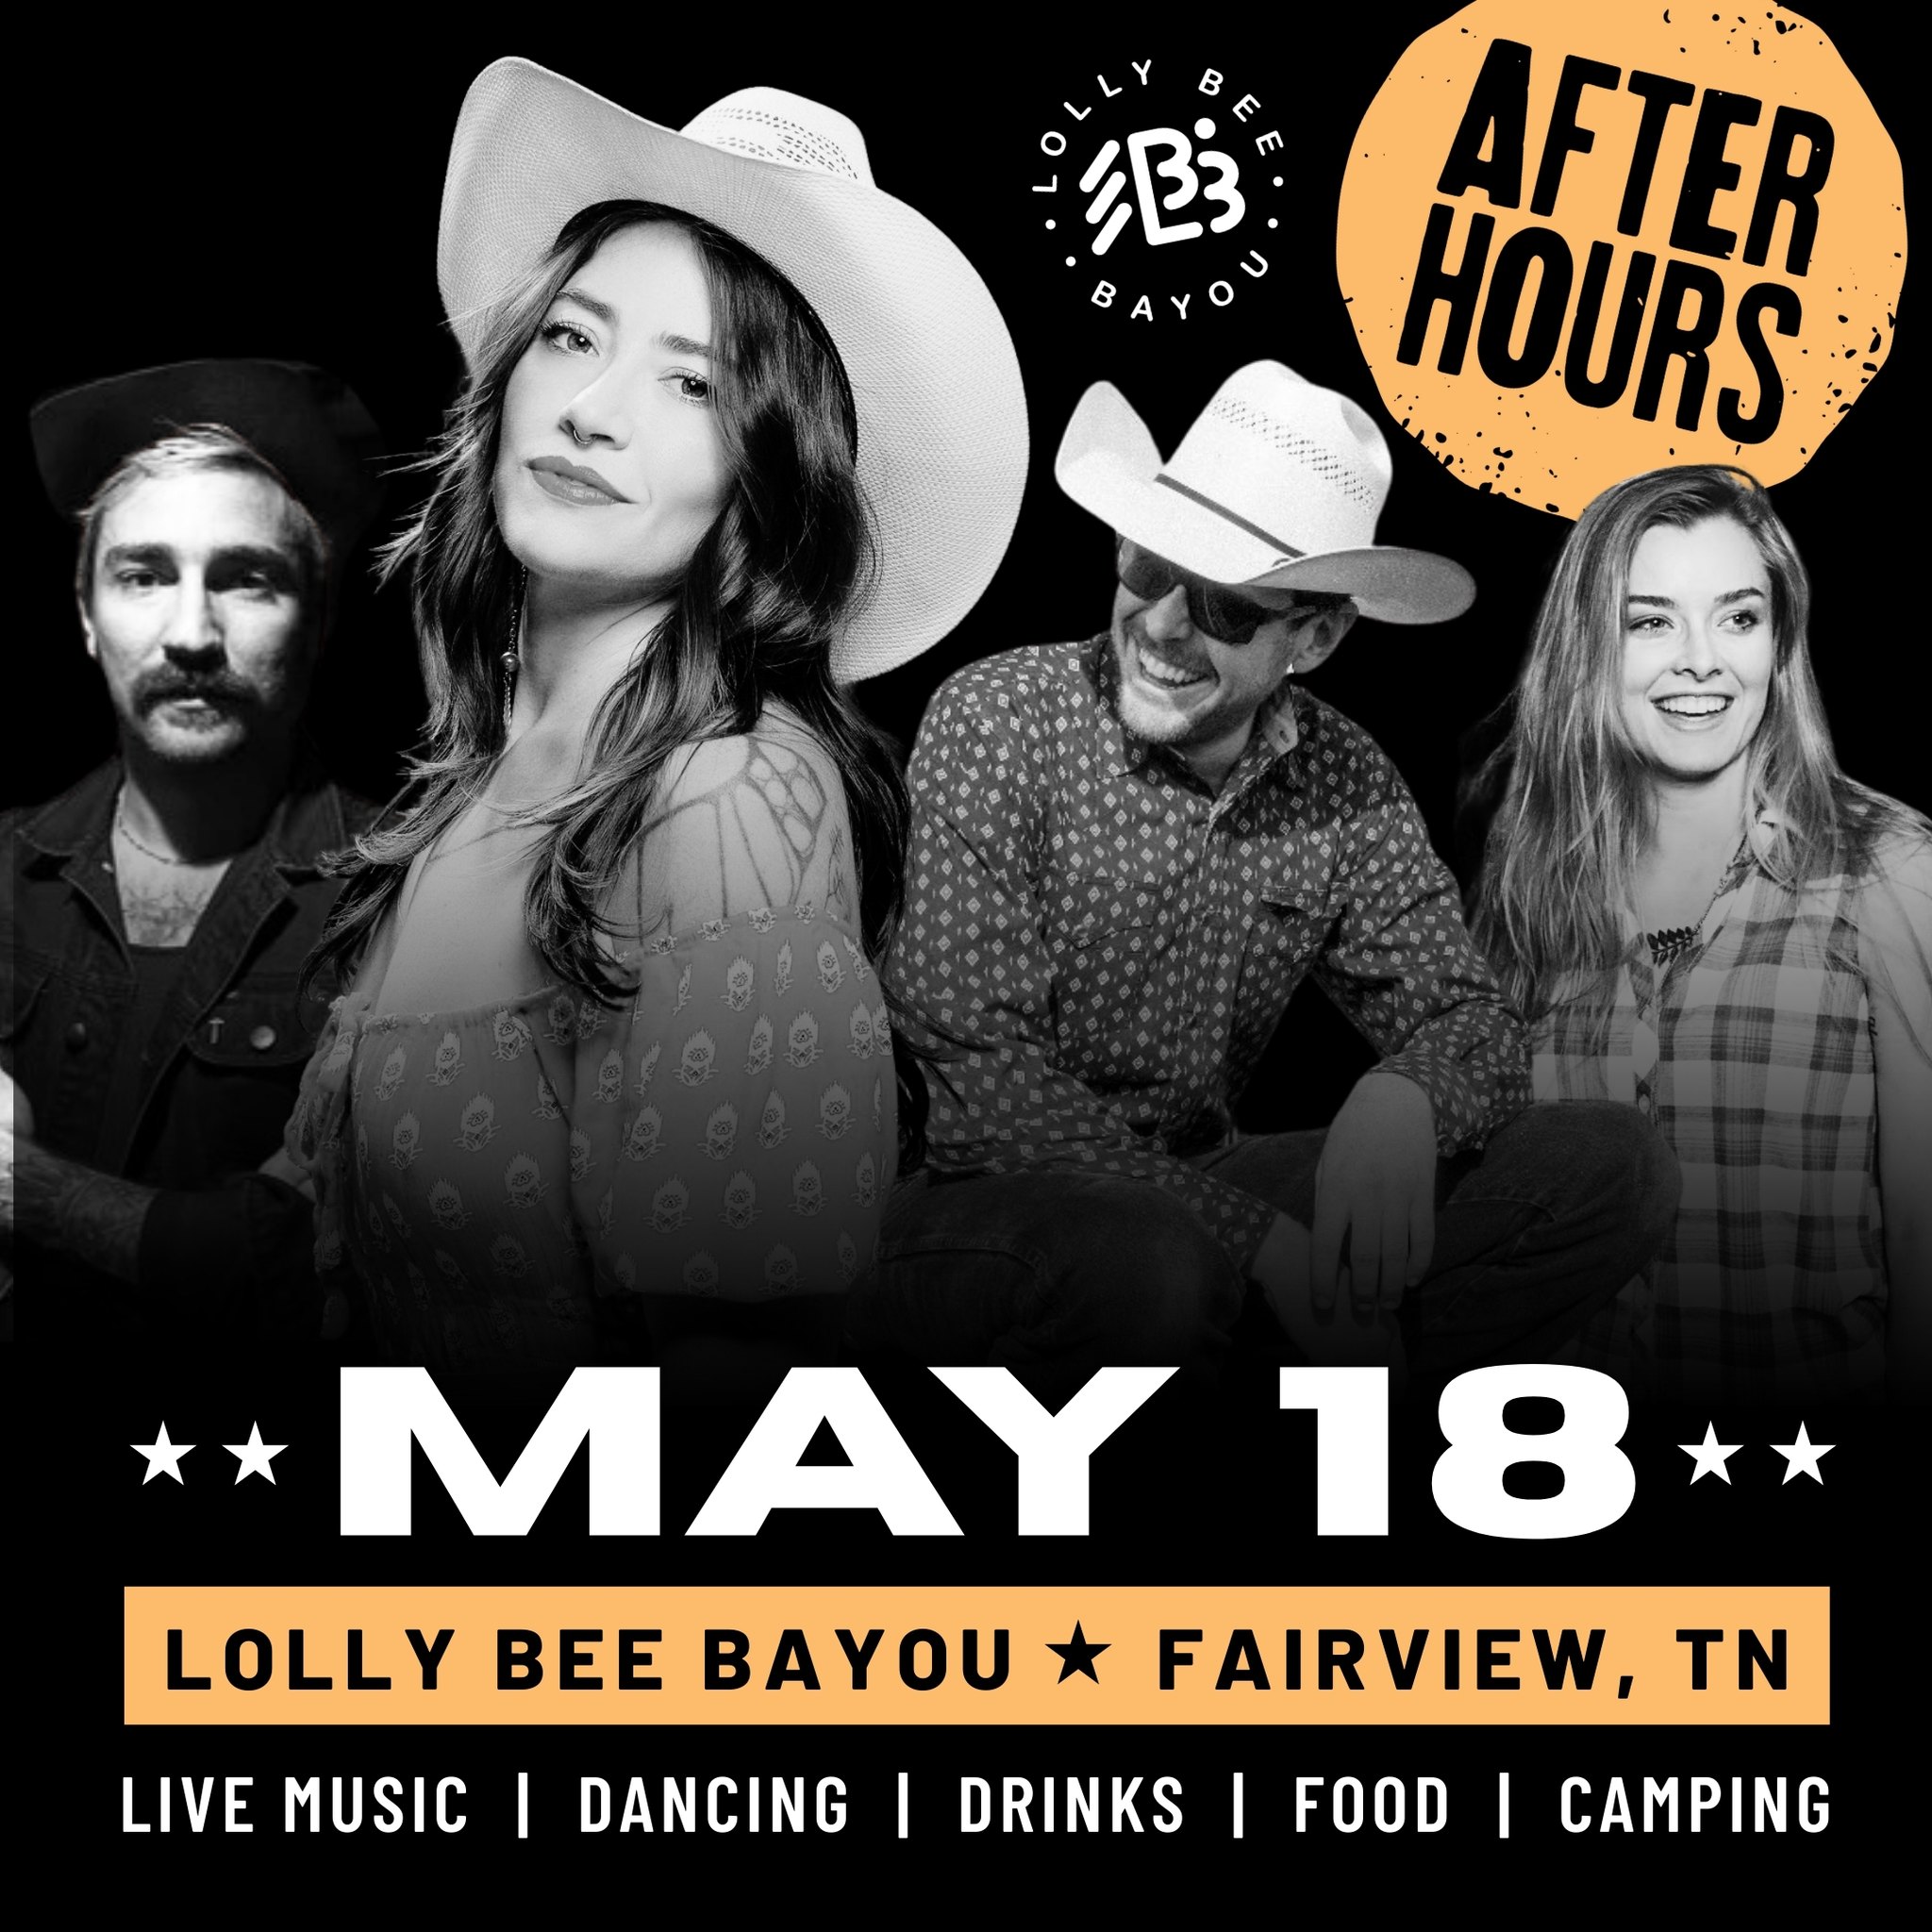 After Hours - Live Music on the Farm at Lolly Bee Bayou in Fairview, Tennessee 7.